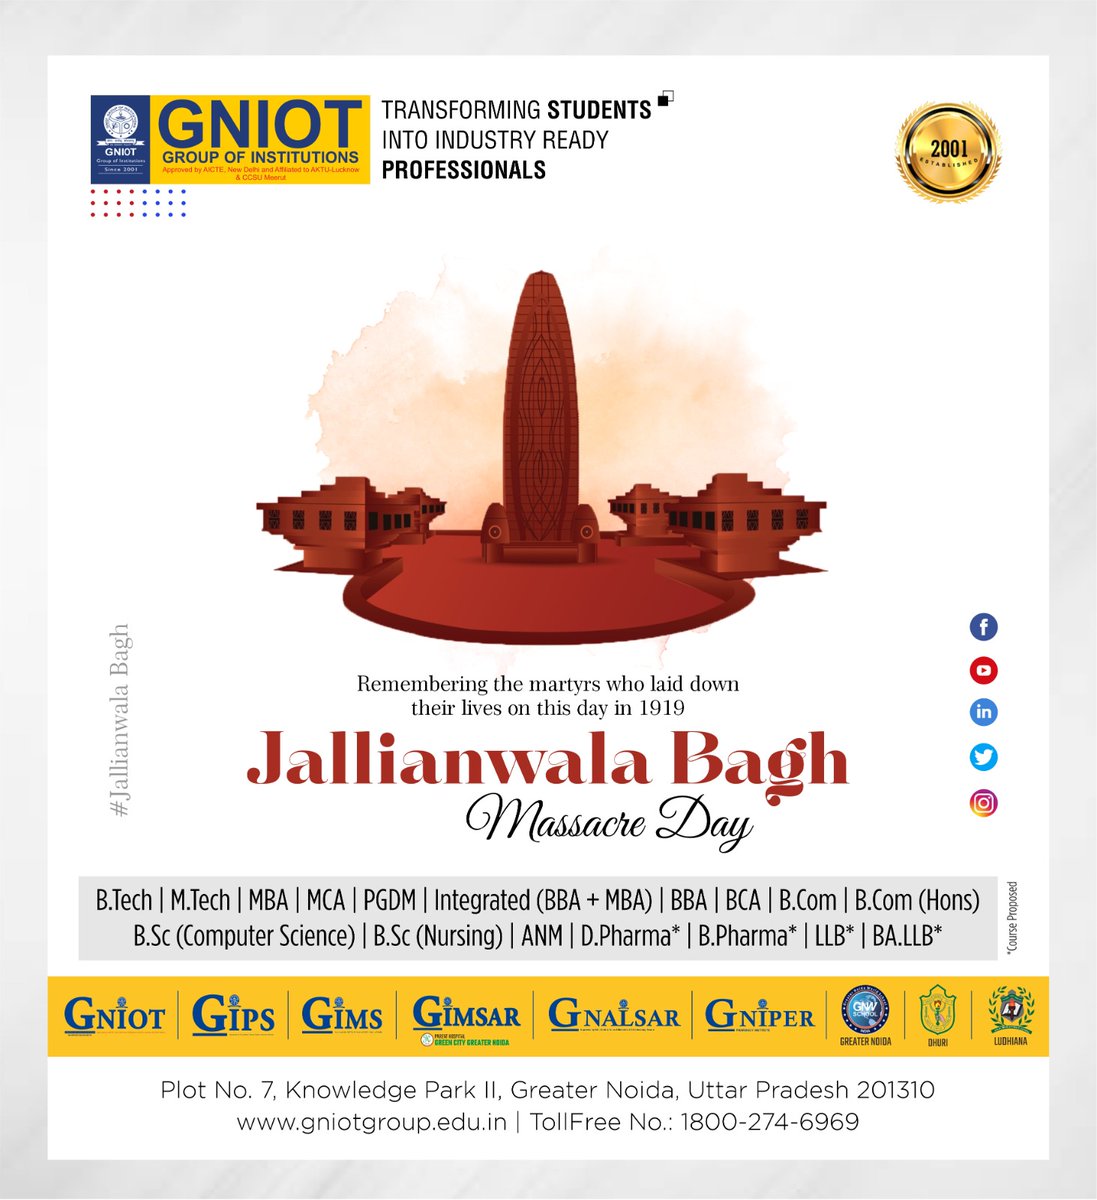 Remembering the martyrs who laid down their lives on this day in 1919.

Visit our Website: gniotgroup.edu.in
Toll Free No.: 18002746969

#JallianwalaBaghMassacre #RememberingTheMartyrs #IndiaRemembers #NeverForget #ColonialAtrocities